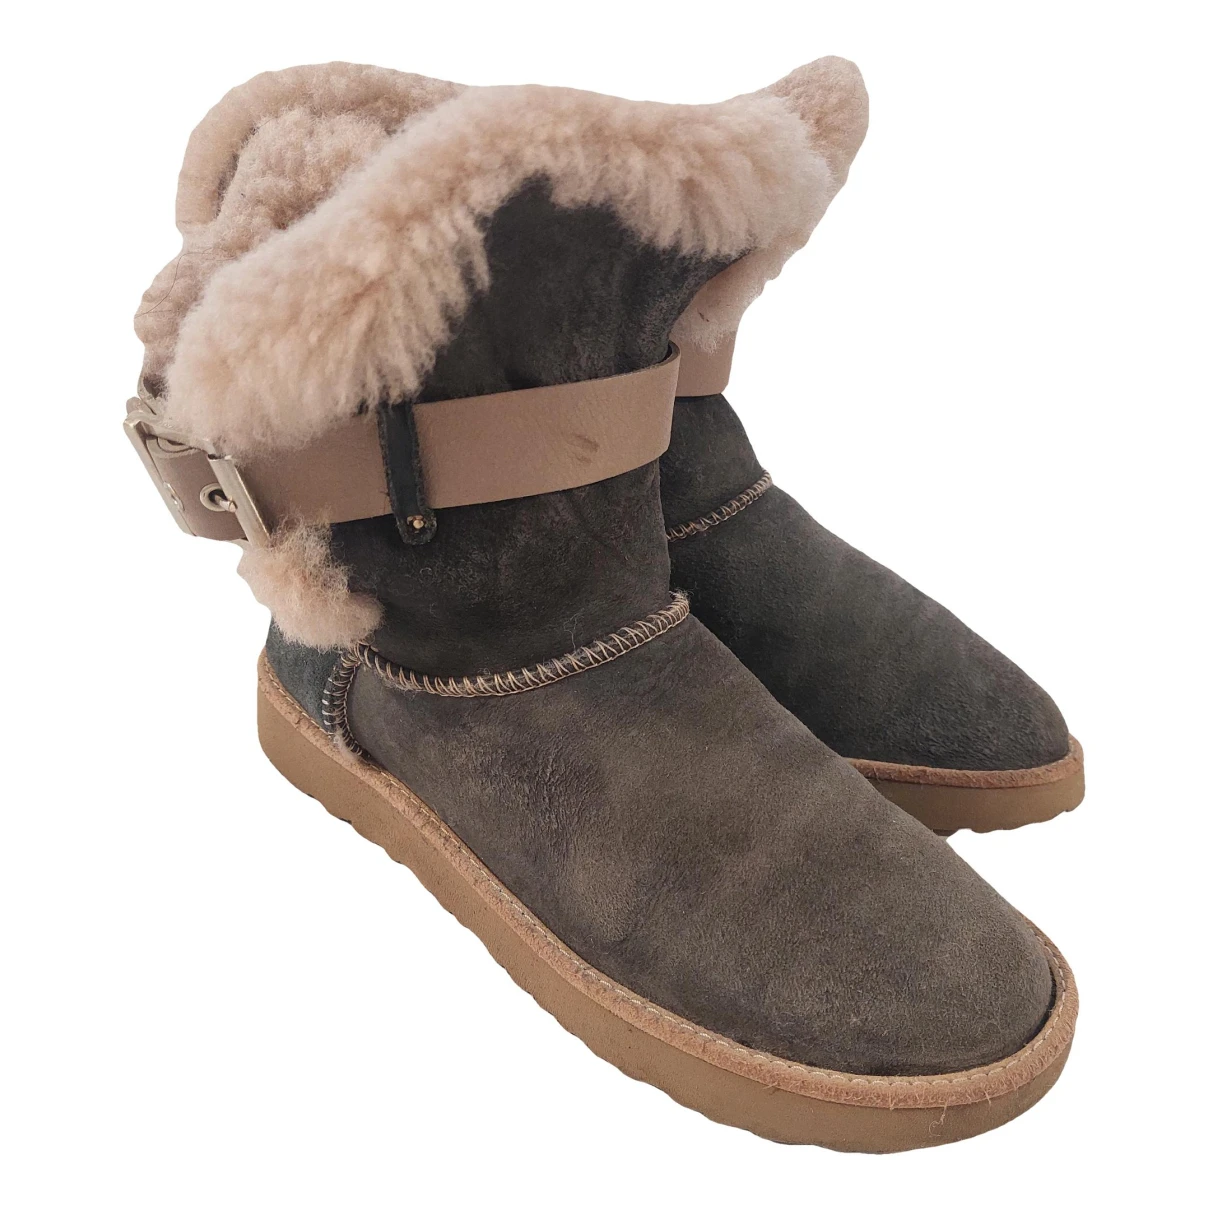 shoes Ugg boots for Female Suede 37 EU. Used condition